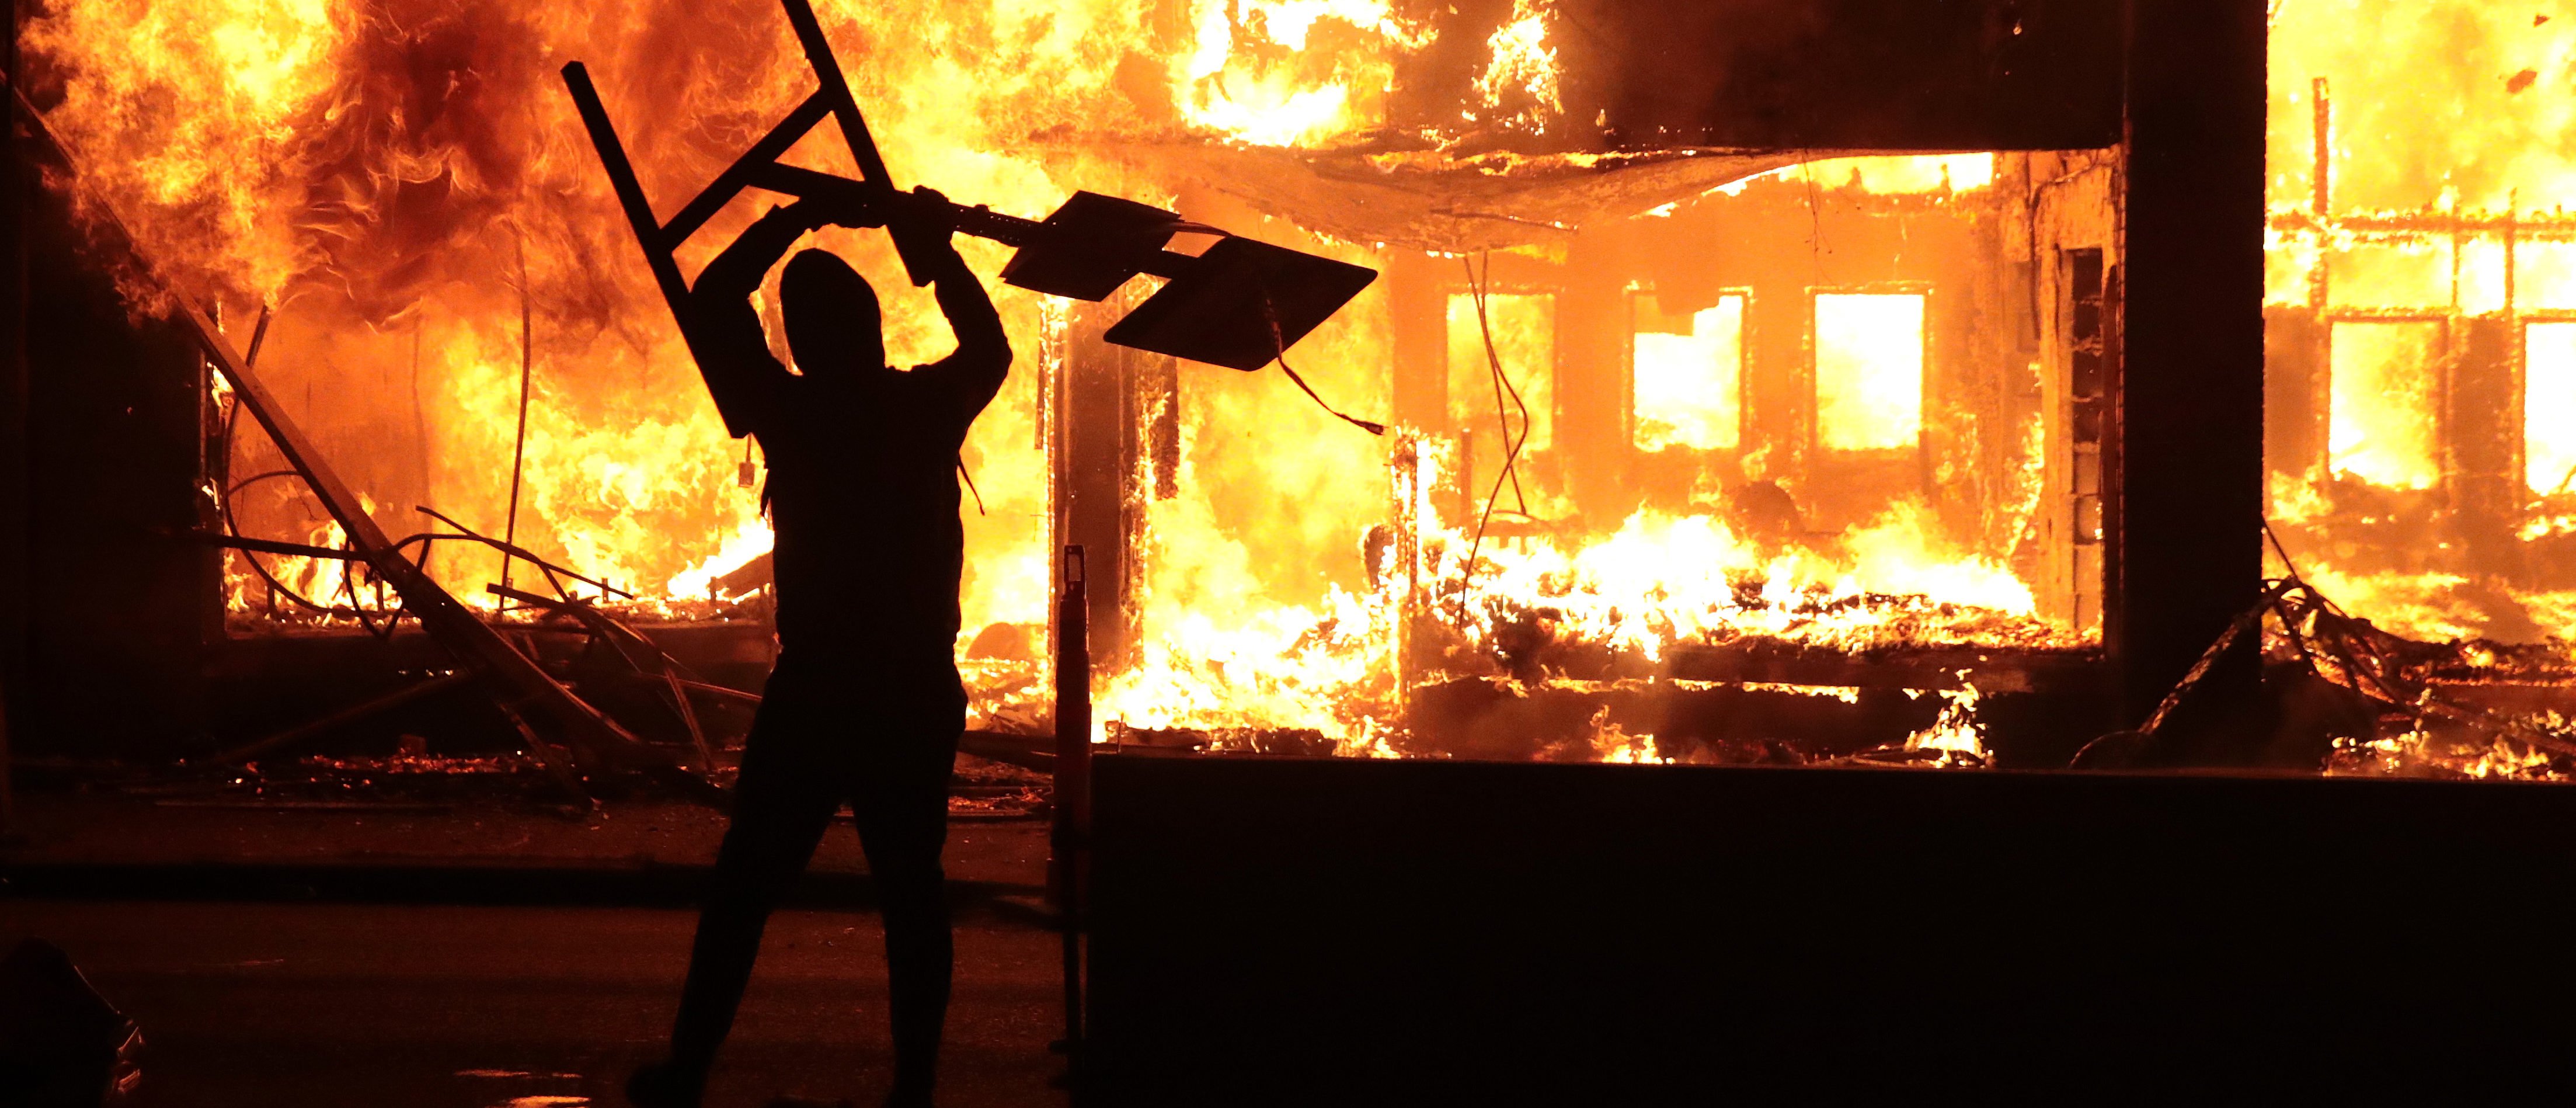 MINNEAPOLIS, MINNESOTA - MAY 29: A man holds up a sign near a burning building during protests sparked by the death of George Floyd while in police custody on May 29, 2020 in Minneapolis, Minnesota. Earlier today, former Minneapolis police officer Derek Chauvin was taken into custody for Floyd's death. Chauvin has been accused of kneeling on Floyd's neck as he pleaded with him about not being able to breathe. Floyd was pronounced dead a short while later. Chauvin and 3 other officers, who were involved in the arrest, were fired from the police department after a video of the arrest was circulated. (Photo by Scott Olson/Getty Images)